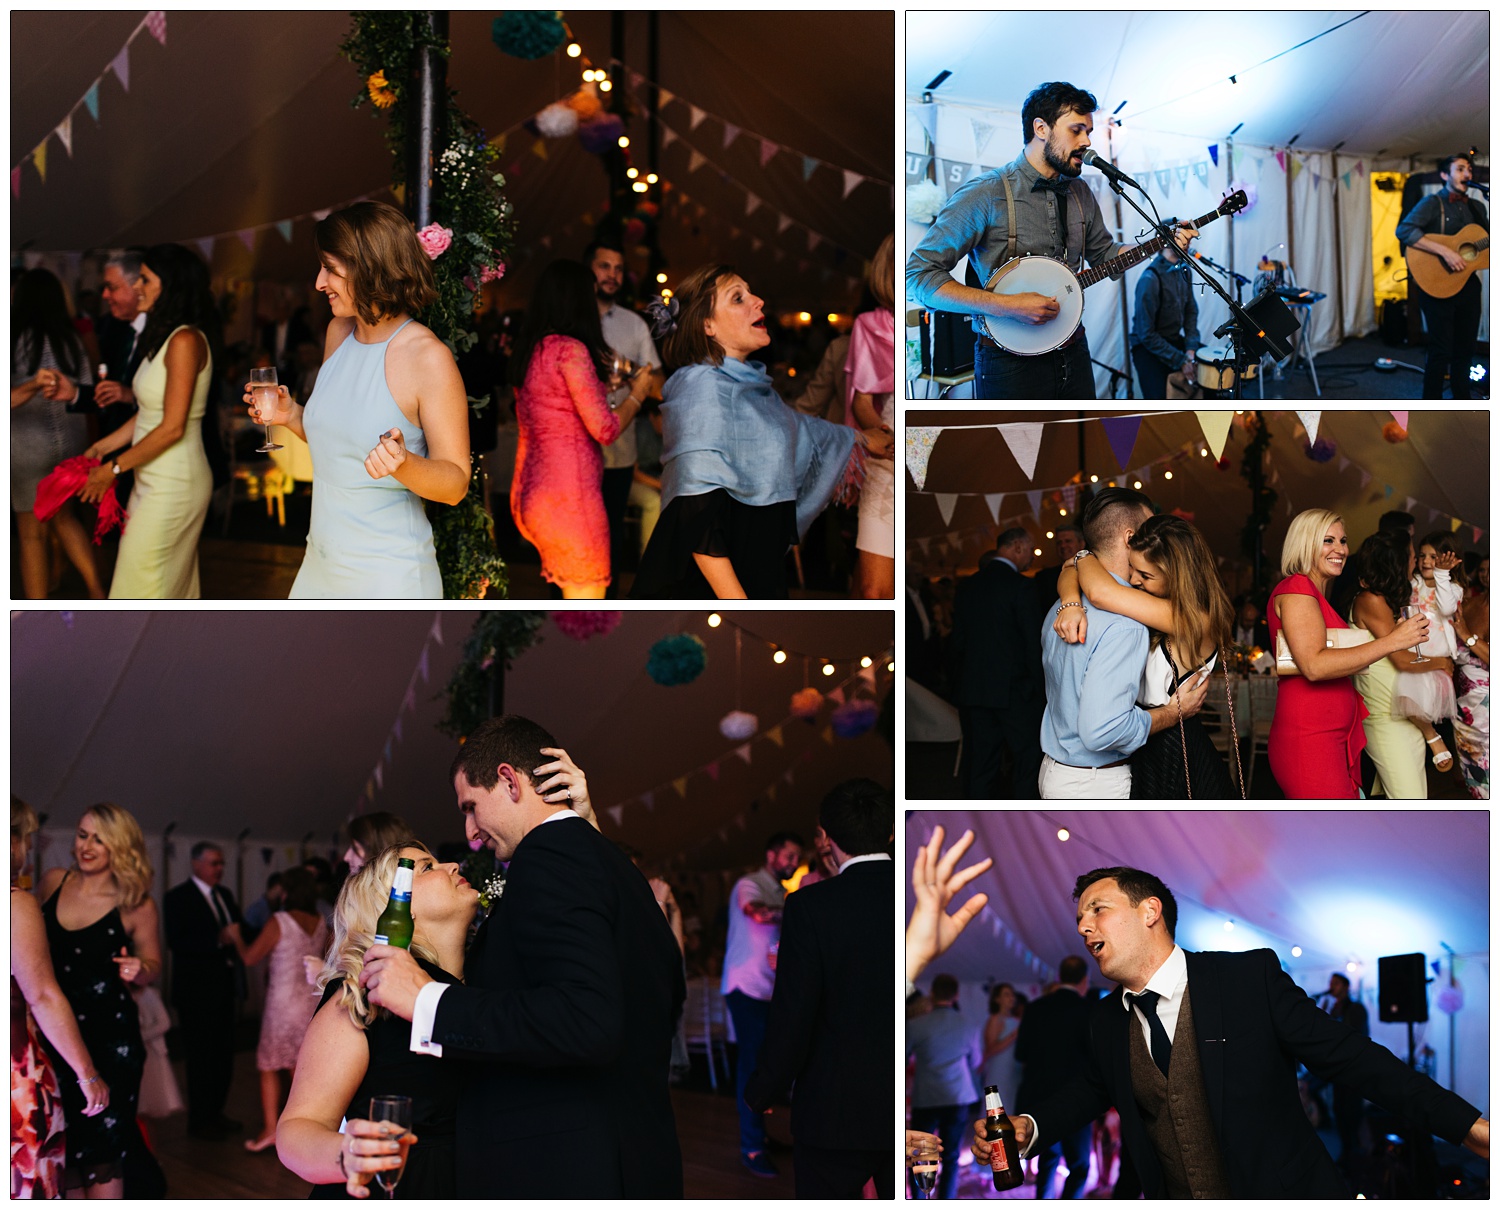 guests dancing to band at a wedding reception in a colourful lit marquee